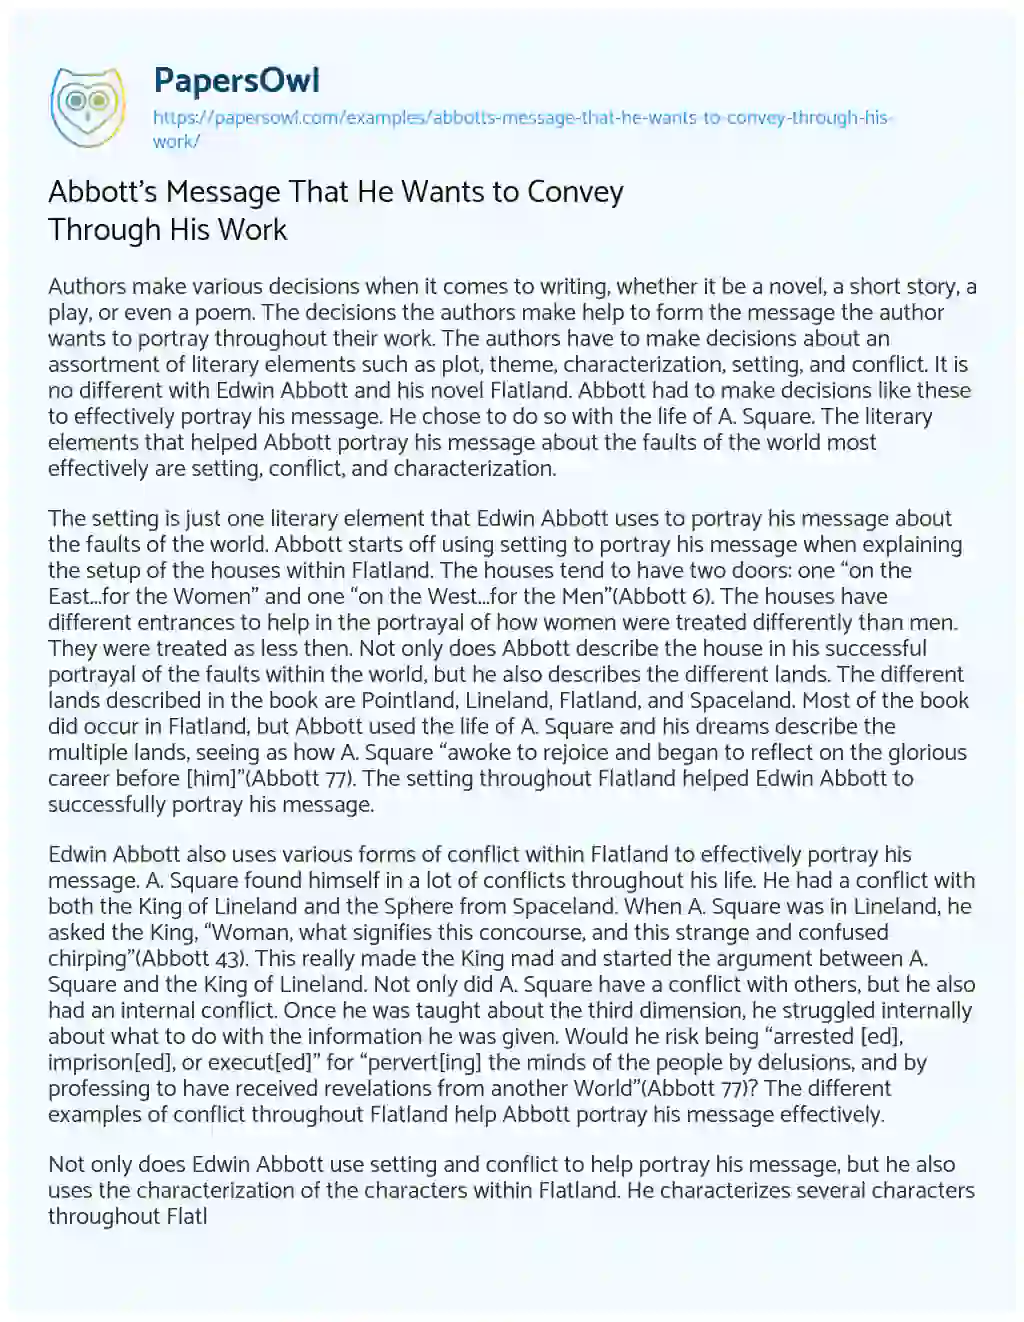 Essay on Abbott’s Message that he Wants to Convey through his Work